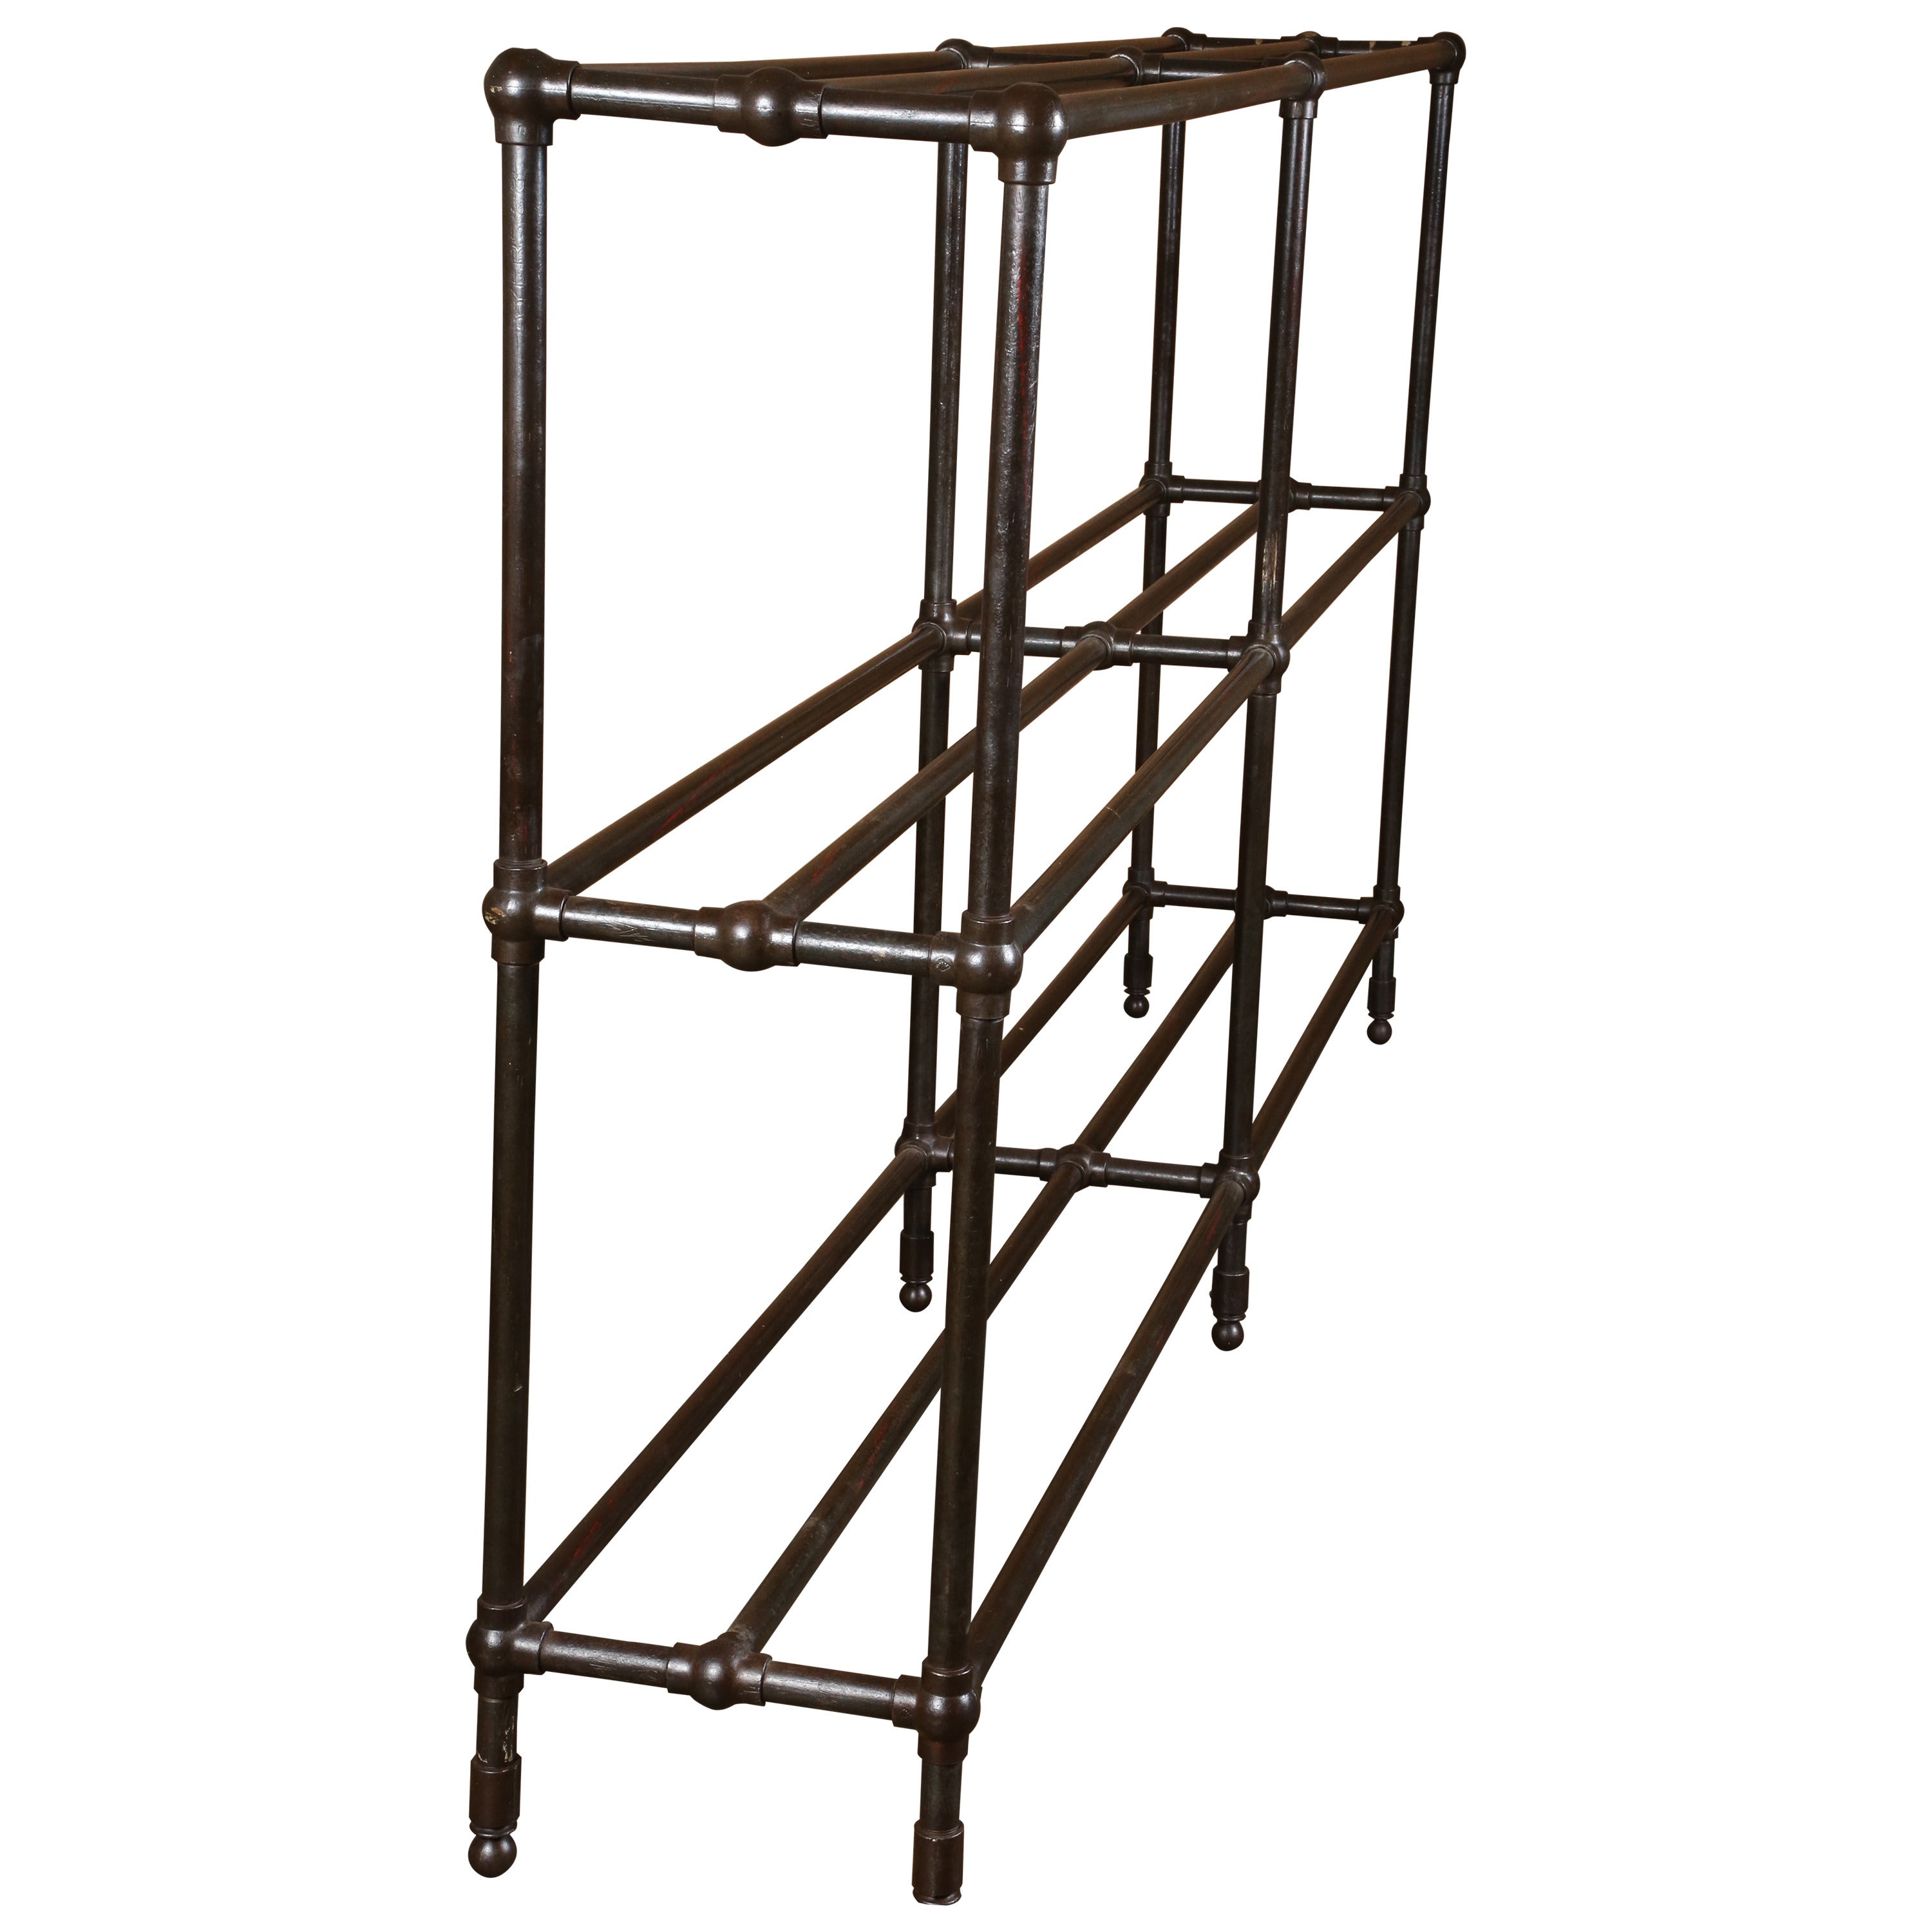 Vintage Industrial steel pipe shelving unit with steel poles and cast iron ball joints. 